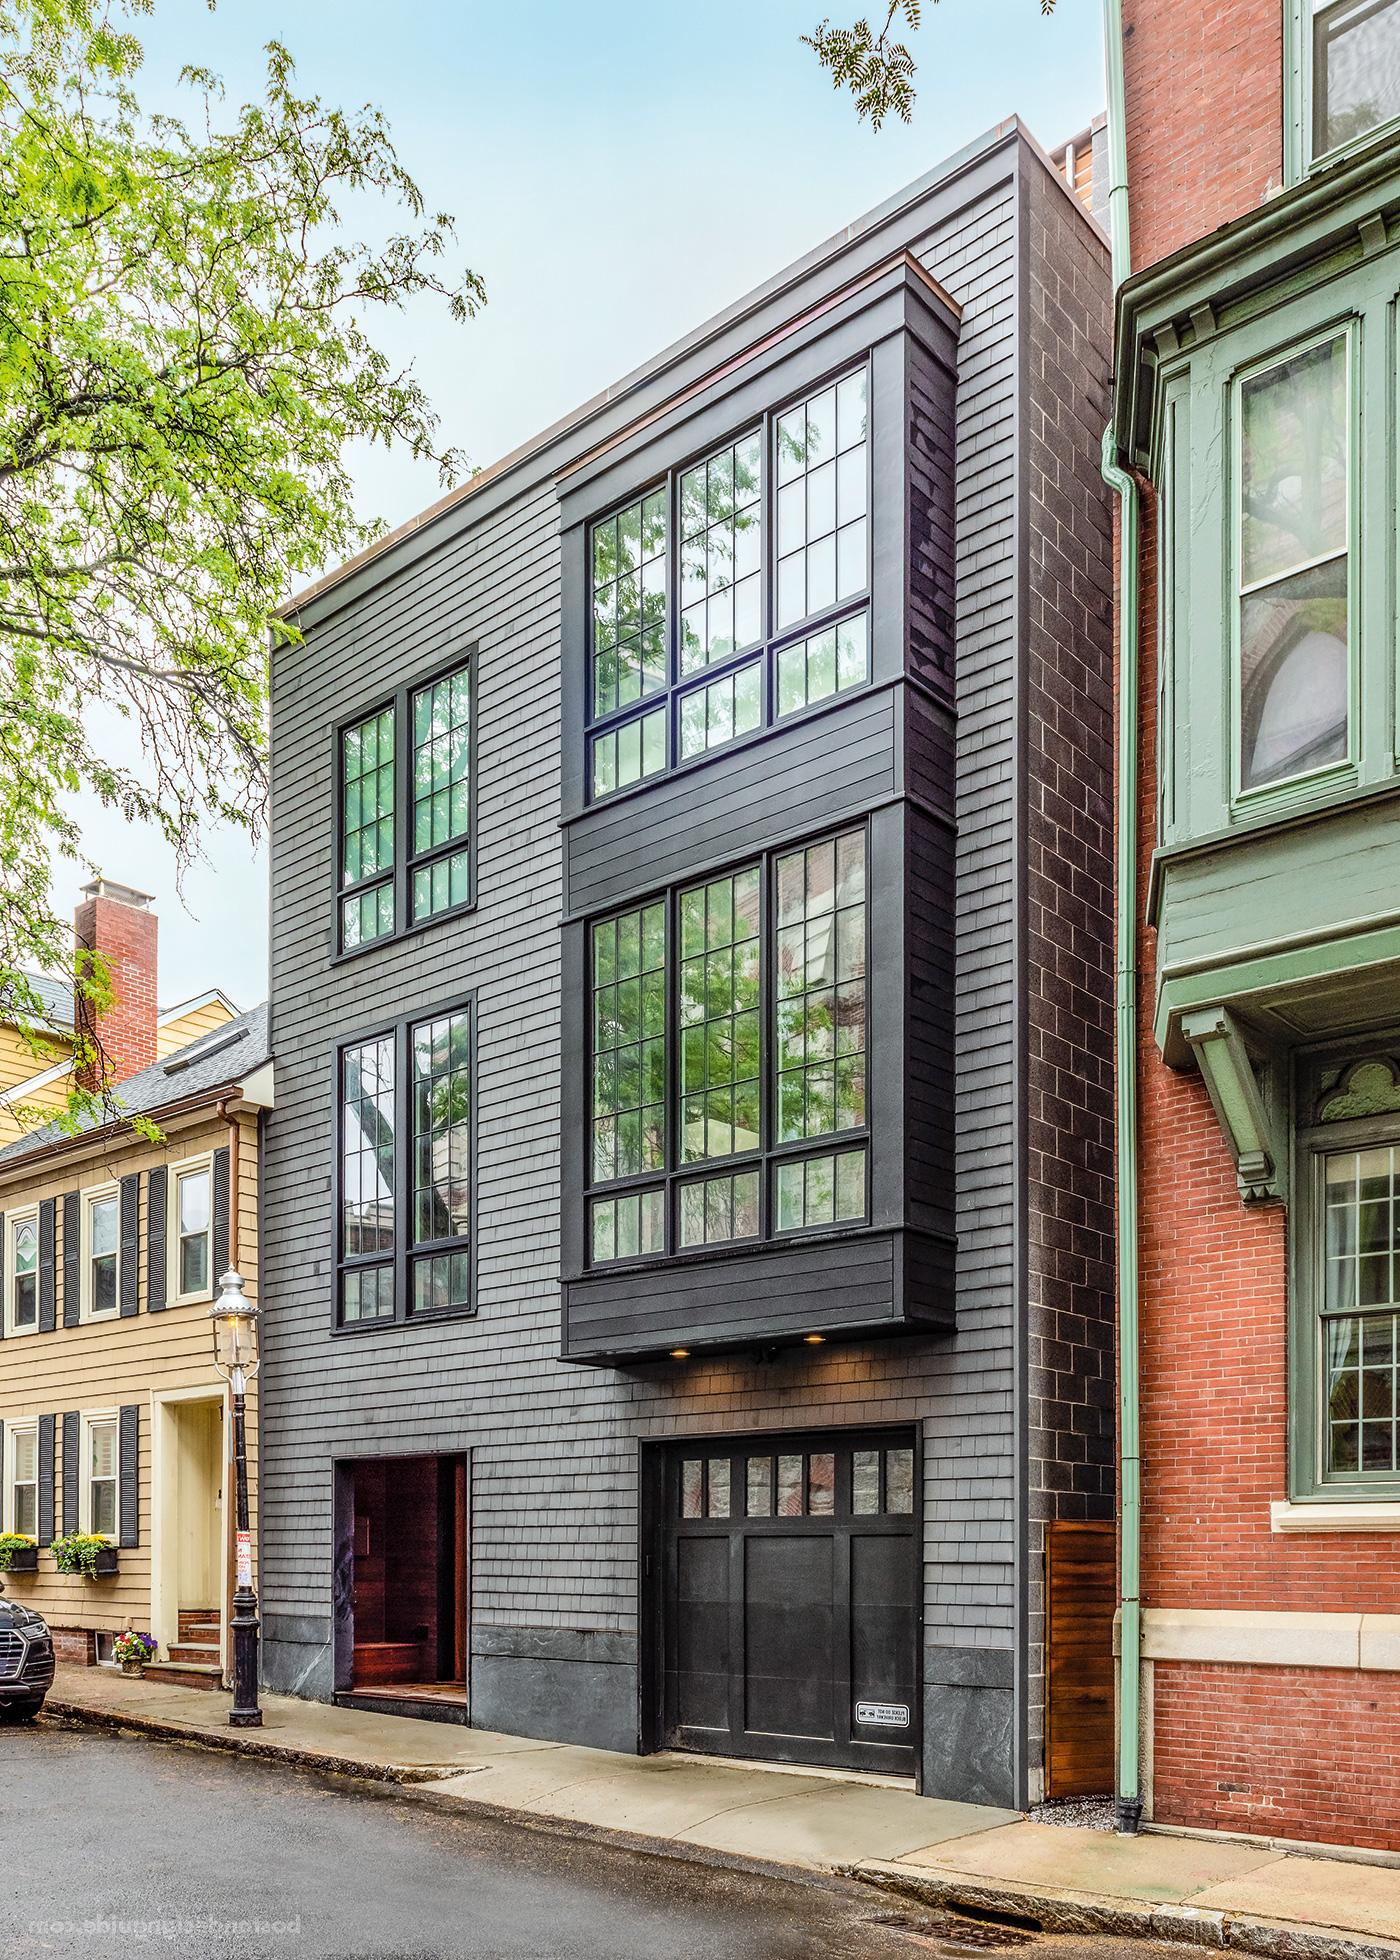 An upscale three-level Boston row house constructed by Columbia Contracting Corp.